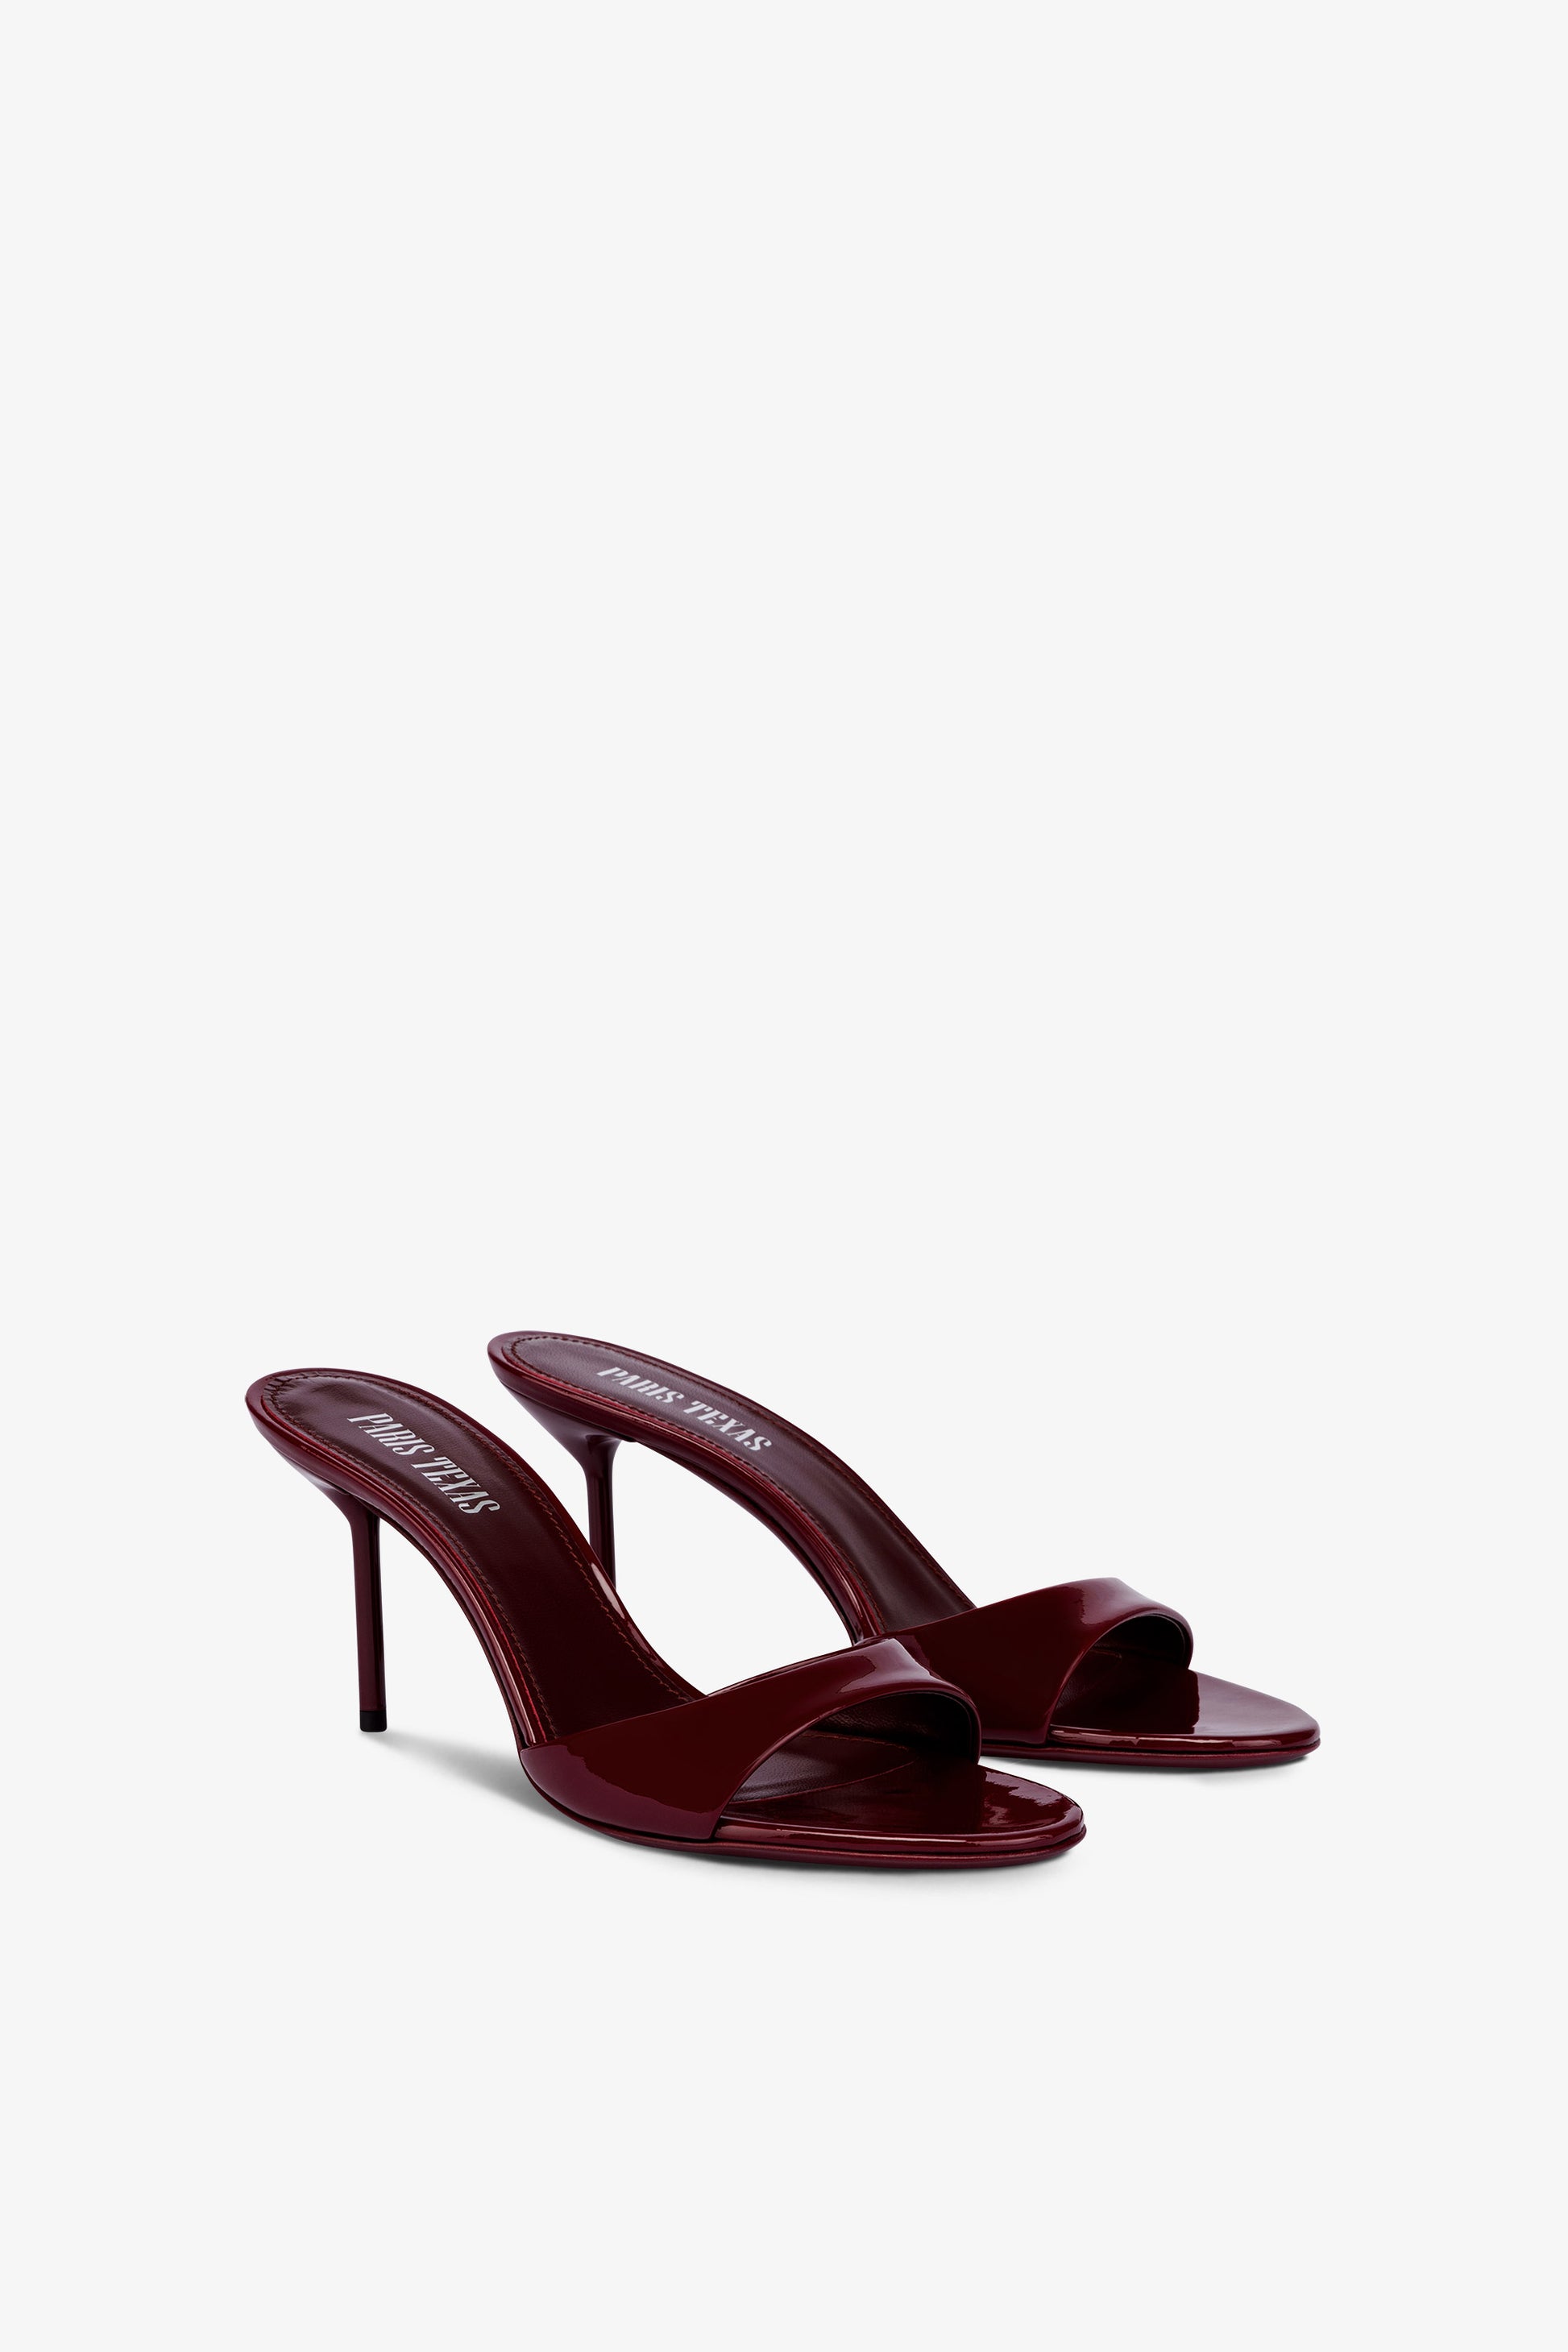 Almond-toe mules in patent rouge noir leather